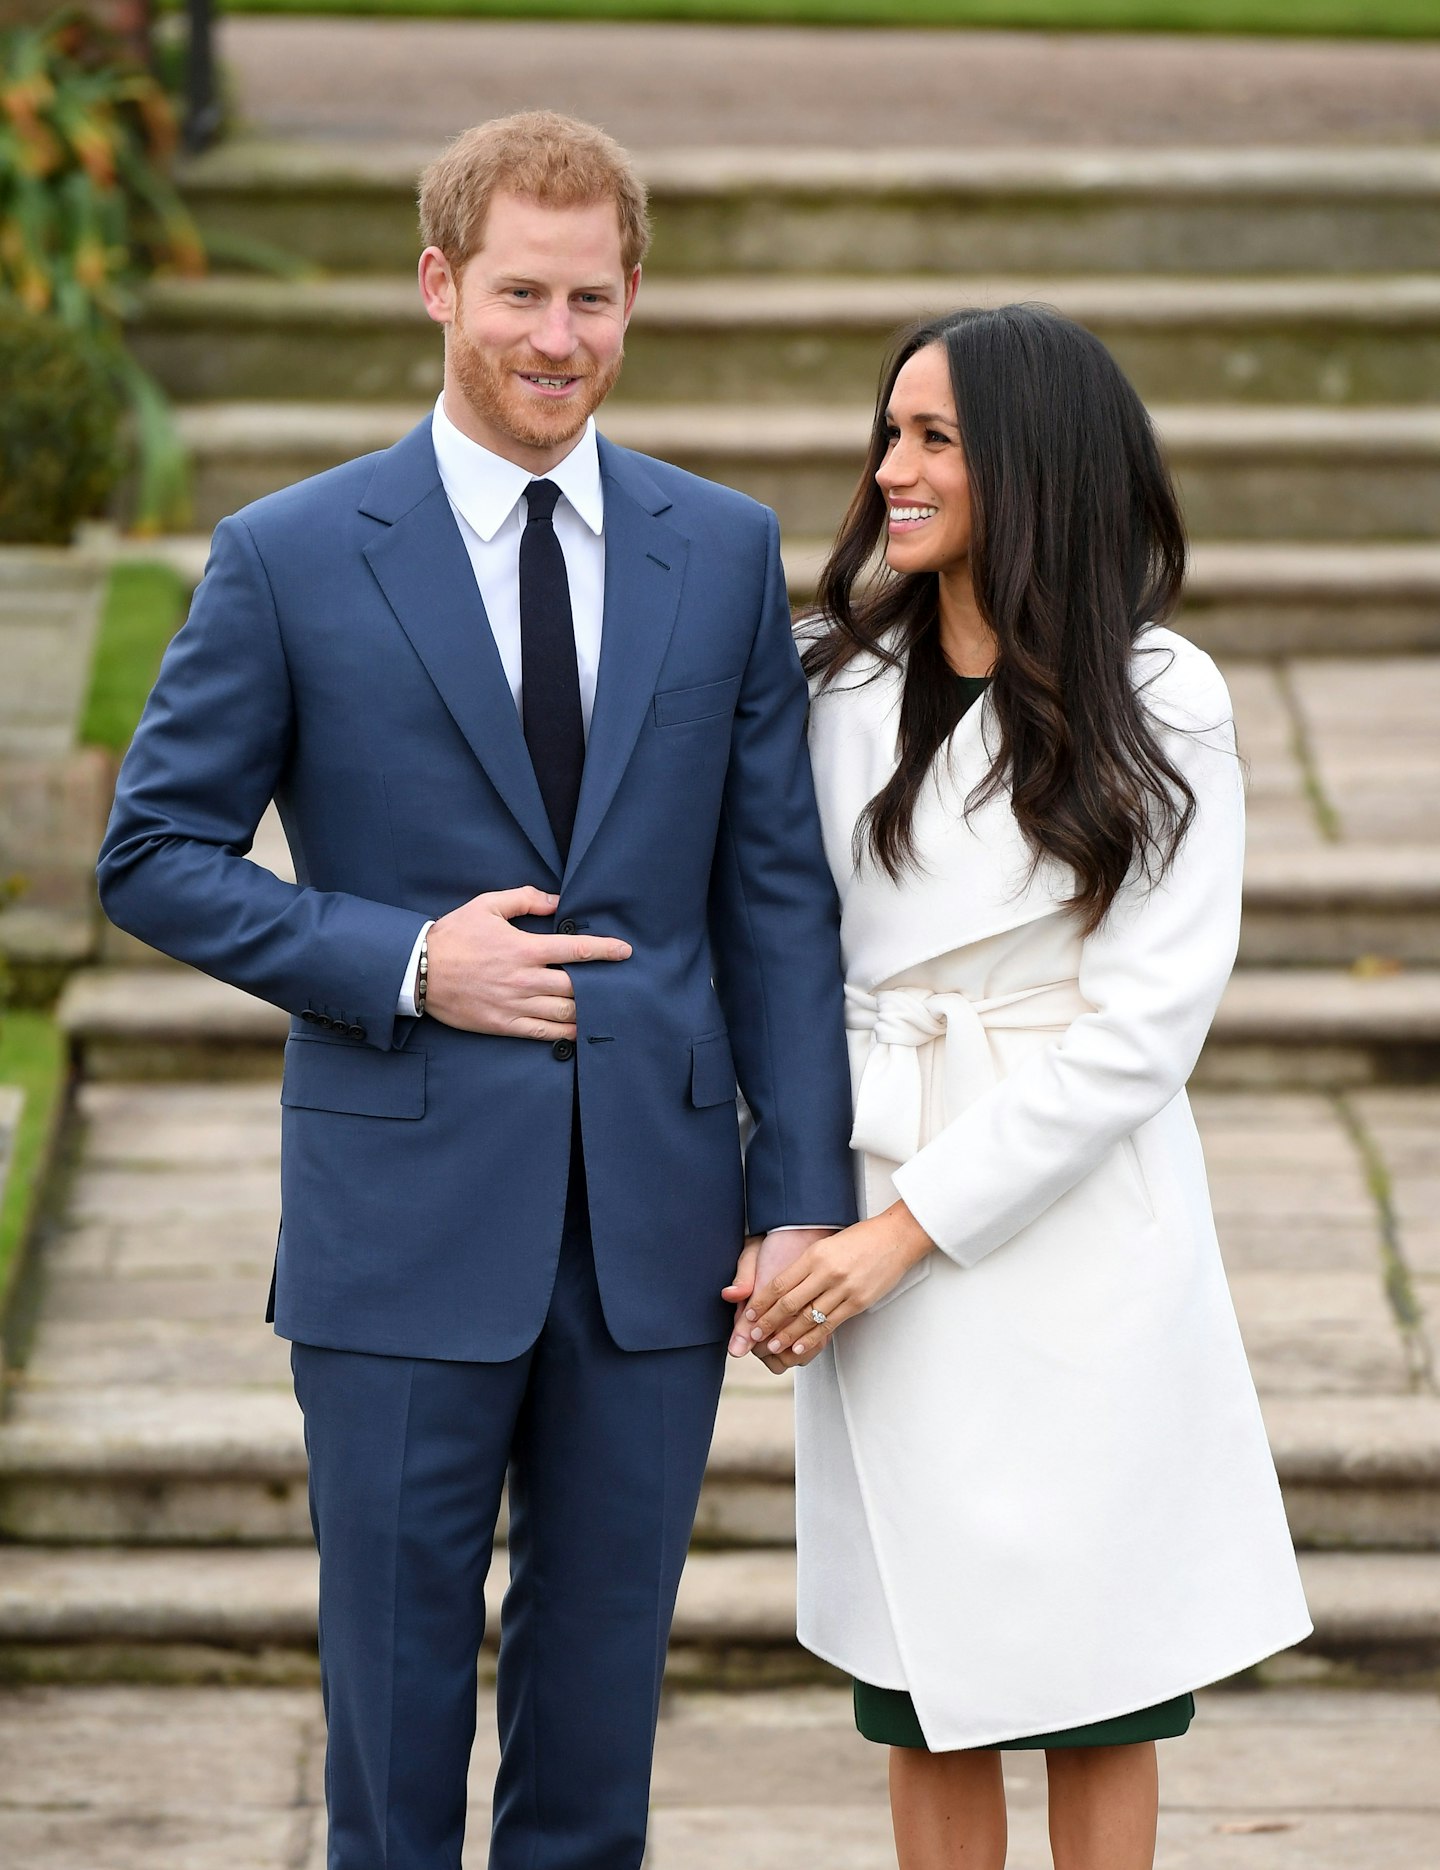 Meghan Markle Rewears Engagement Dress For The Well Child Awards